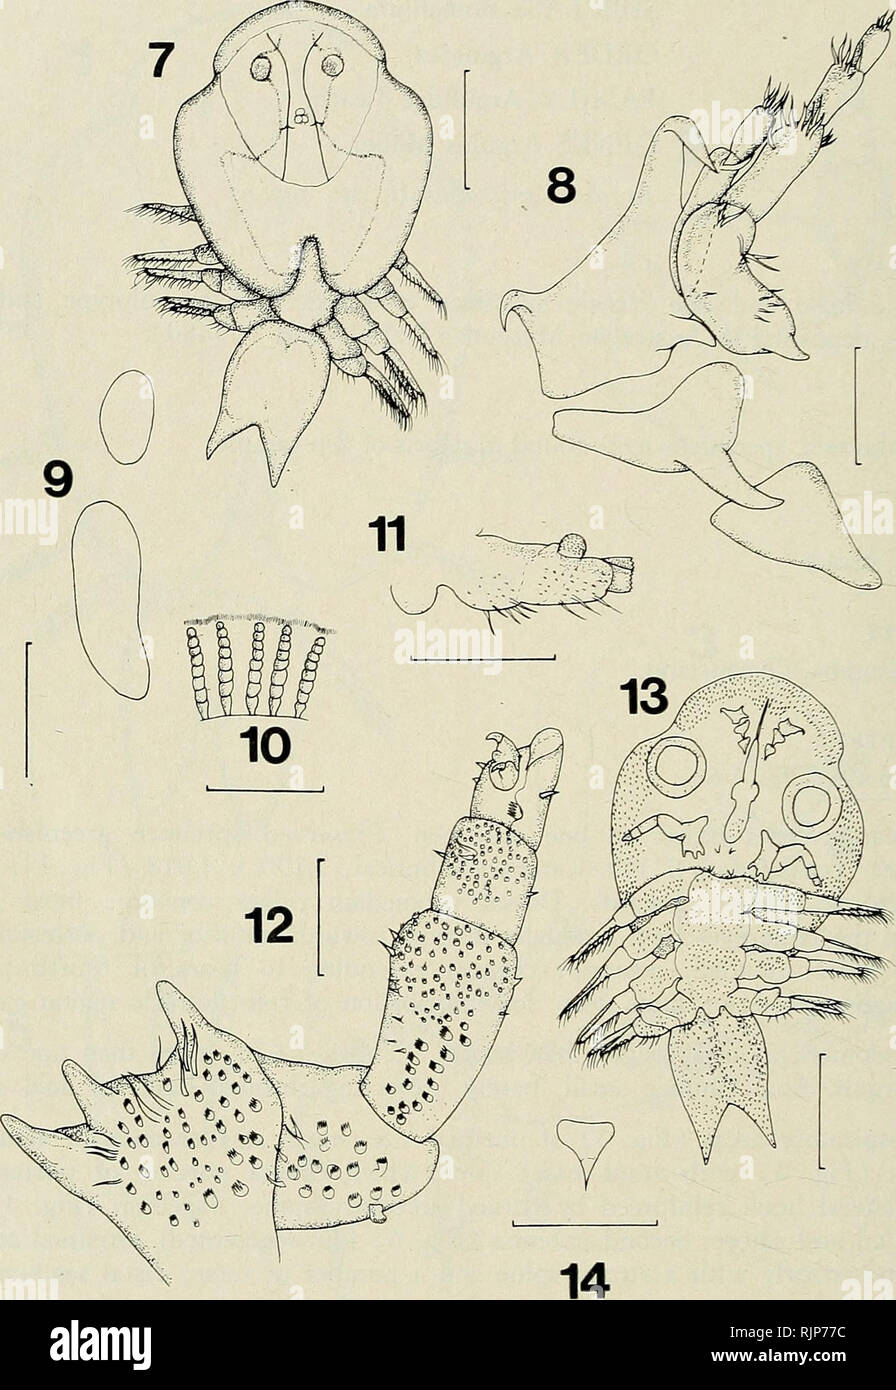 . The Australian zoologist. Zoology; Zoology; Zoology. THOMAS BYRNES. Argulus australiensis, sp. nov. Fig. 7. Male, dorsal. Fig. 8. First and second antennae, ventral. Fig. 9. Respiratory areas, ventral. Fig. 10. Ribs of sucker. Fig. 11. Basal portion of fourth leg, ventral. Fig. 12. Maxilliped, ventral. Fig. 13. Male, ventral. Fig. 14. Tooth-like process. Scales lines: (7) and (13) 1,000 Mm. (8), (10) and (12) 100 Mm. (9) and (11) 500 Mm. (14) 50 Mm. 582 Aust. Zool. 21(7), 1985. Please note that these images are extracted from scanned page images that may have been digitally enhanced for read Stock Photo